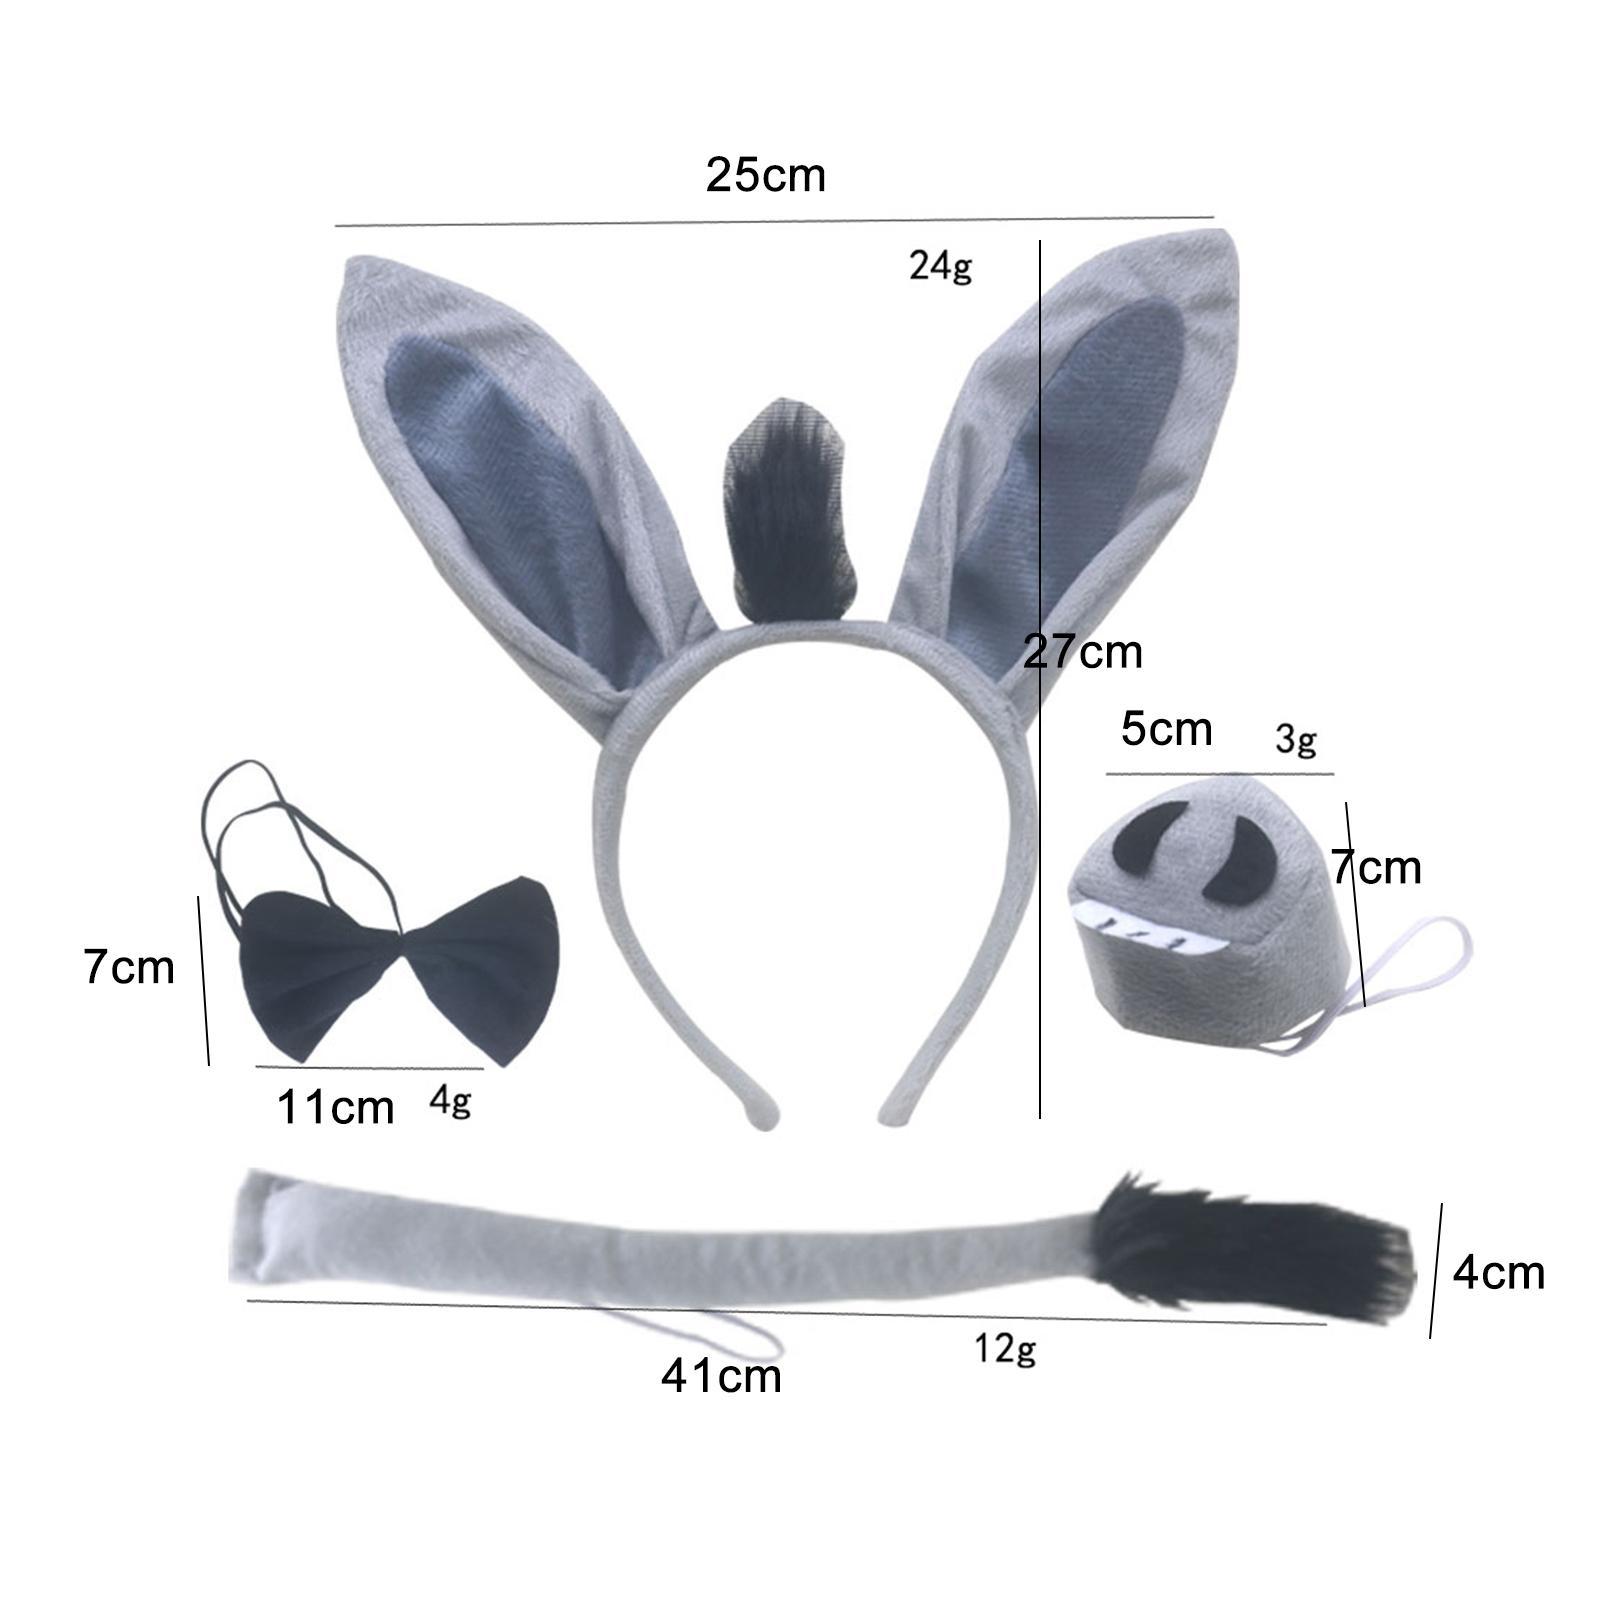 Kids Fancy Dress Up Bunny Costumes Props for Performance Theater Stage